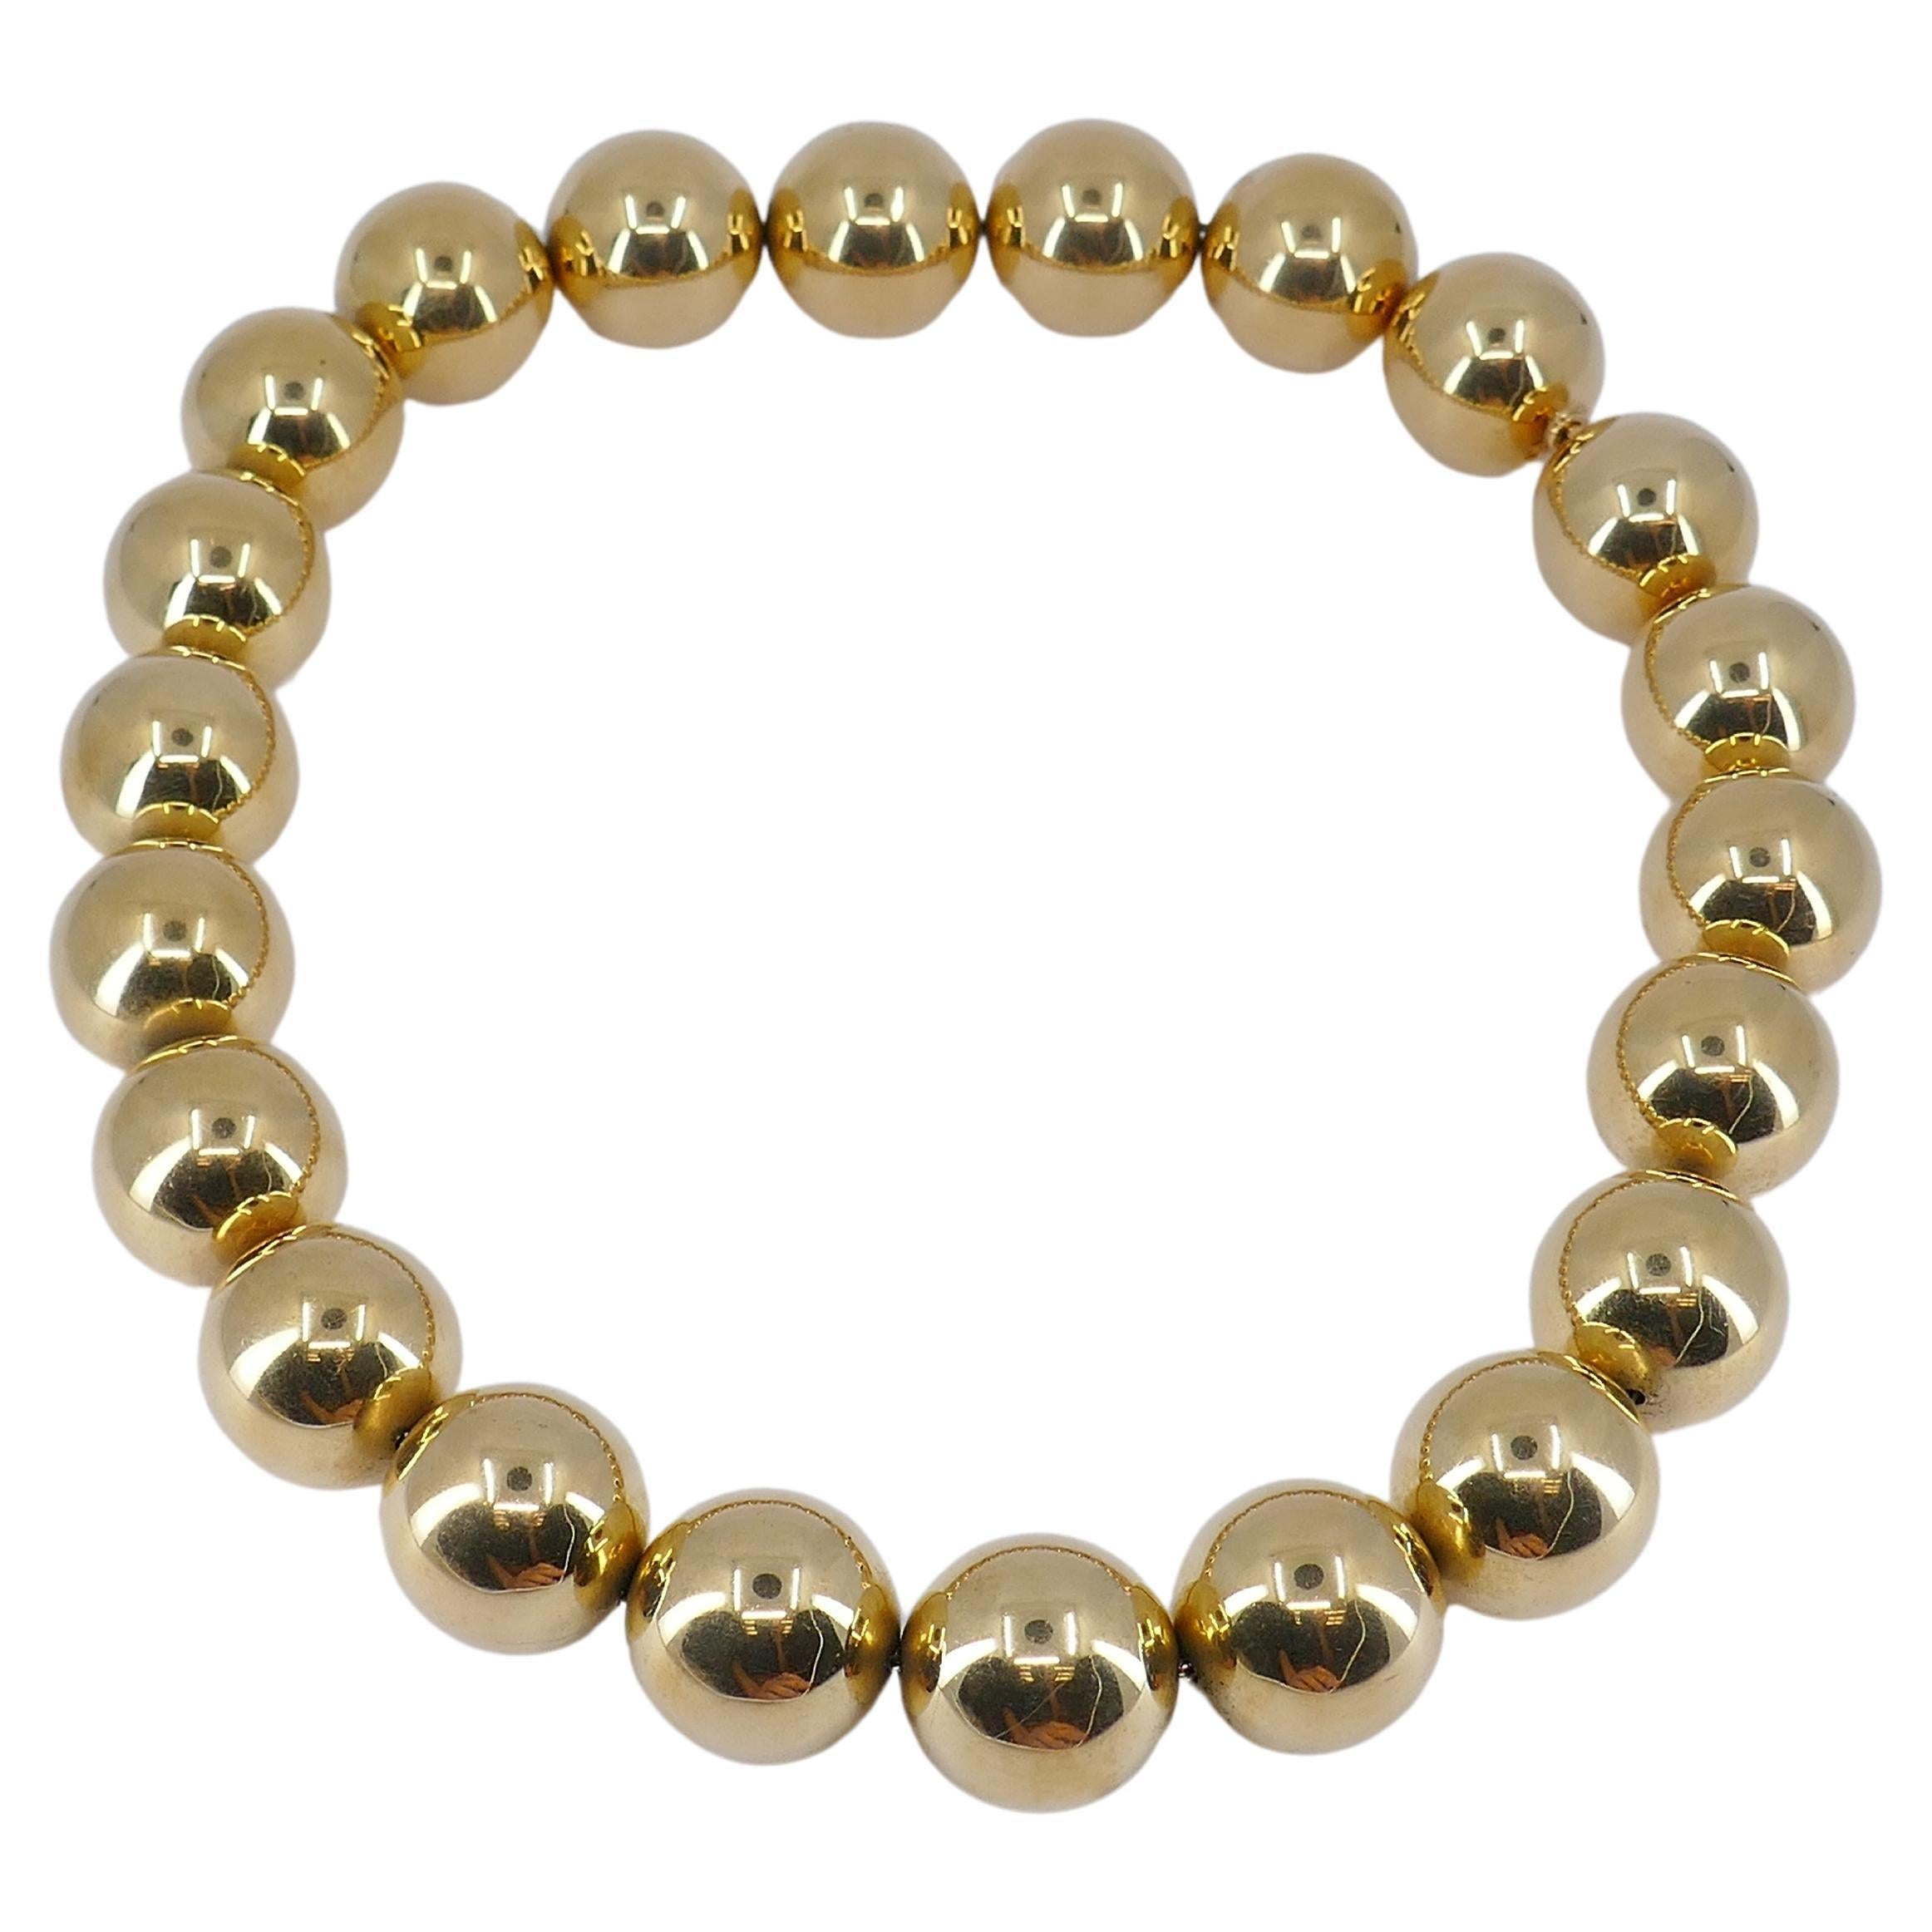 Women's Vintage Tiffany & Co. 14k Gold Bead Necklace